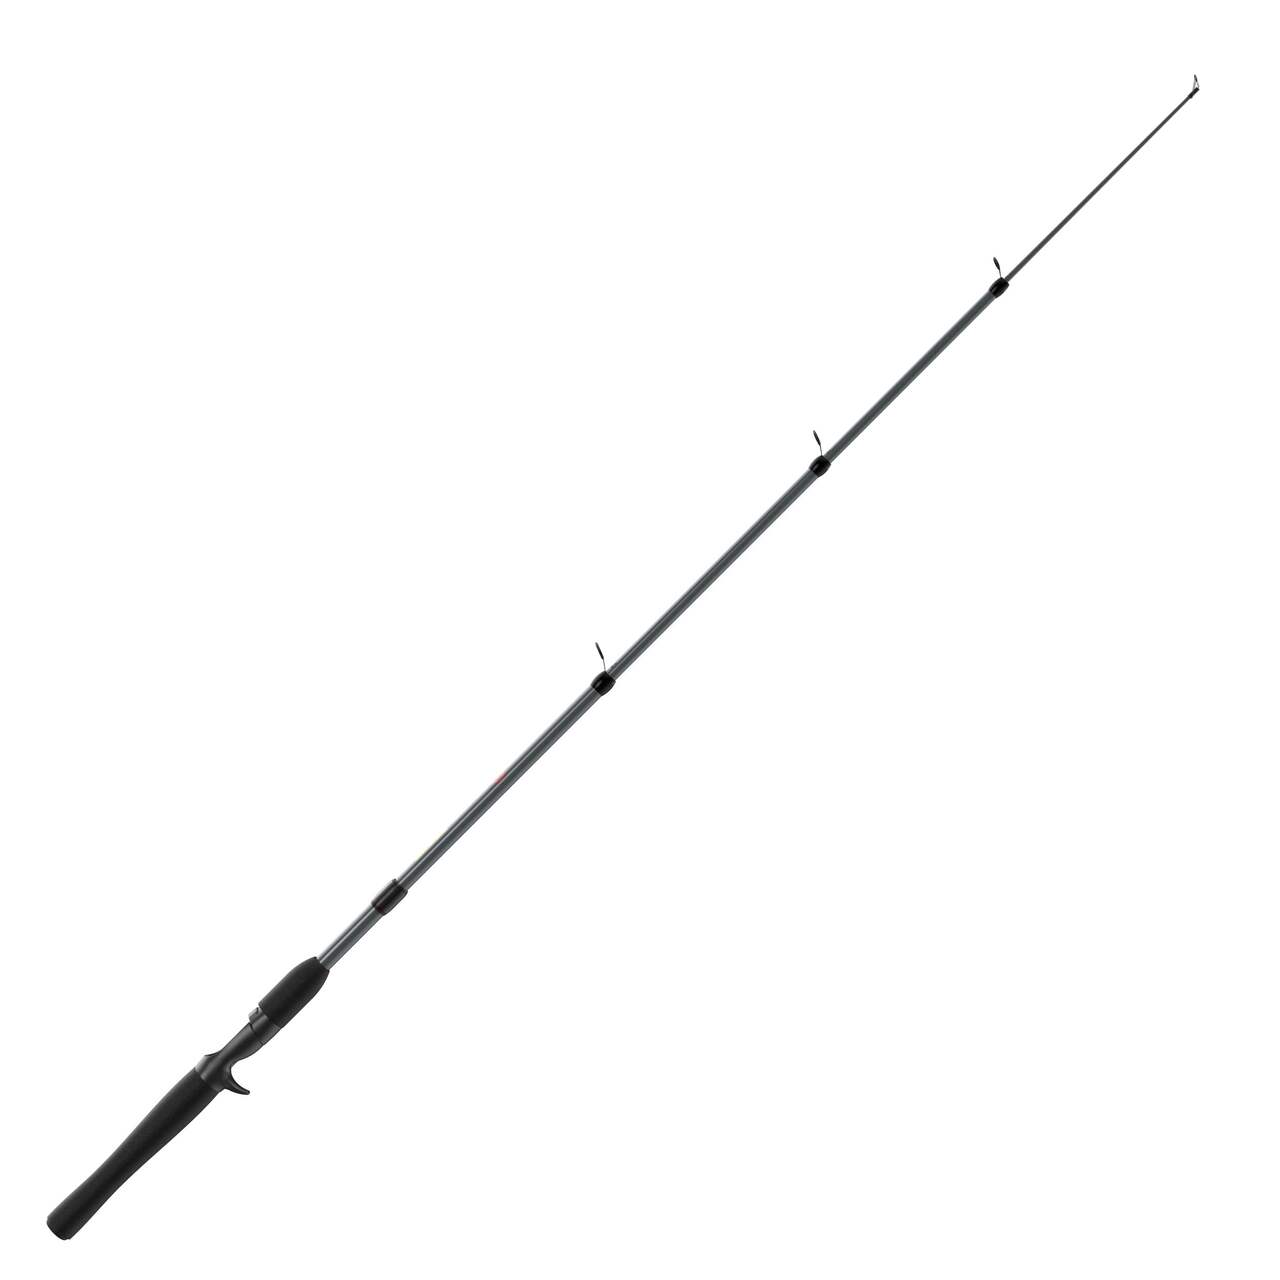  Z-Cast Spinning Fishing Rod, Extendable 17-Inches To 5-Foot  6-Inch Telescopic Durable Z-Glass Fishing Pole, Comfortable EVA Rod Handle,  Shock-Ring Guides, Medium Power, Red